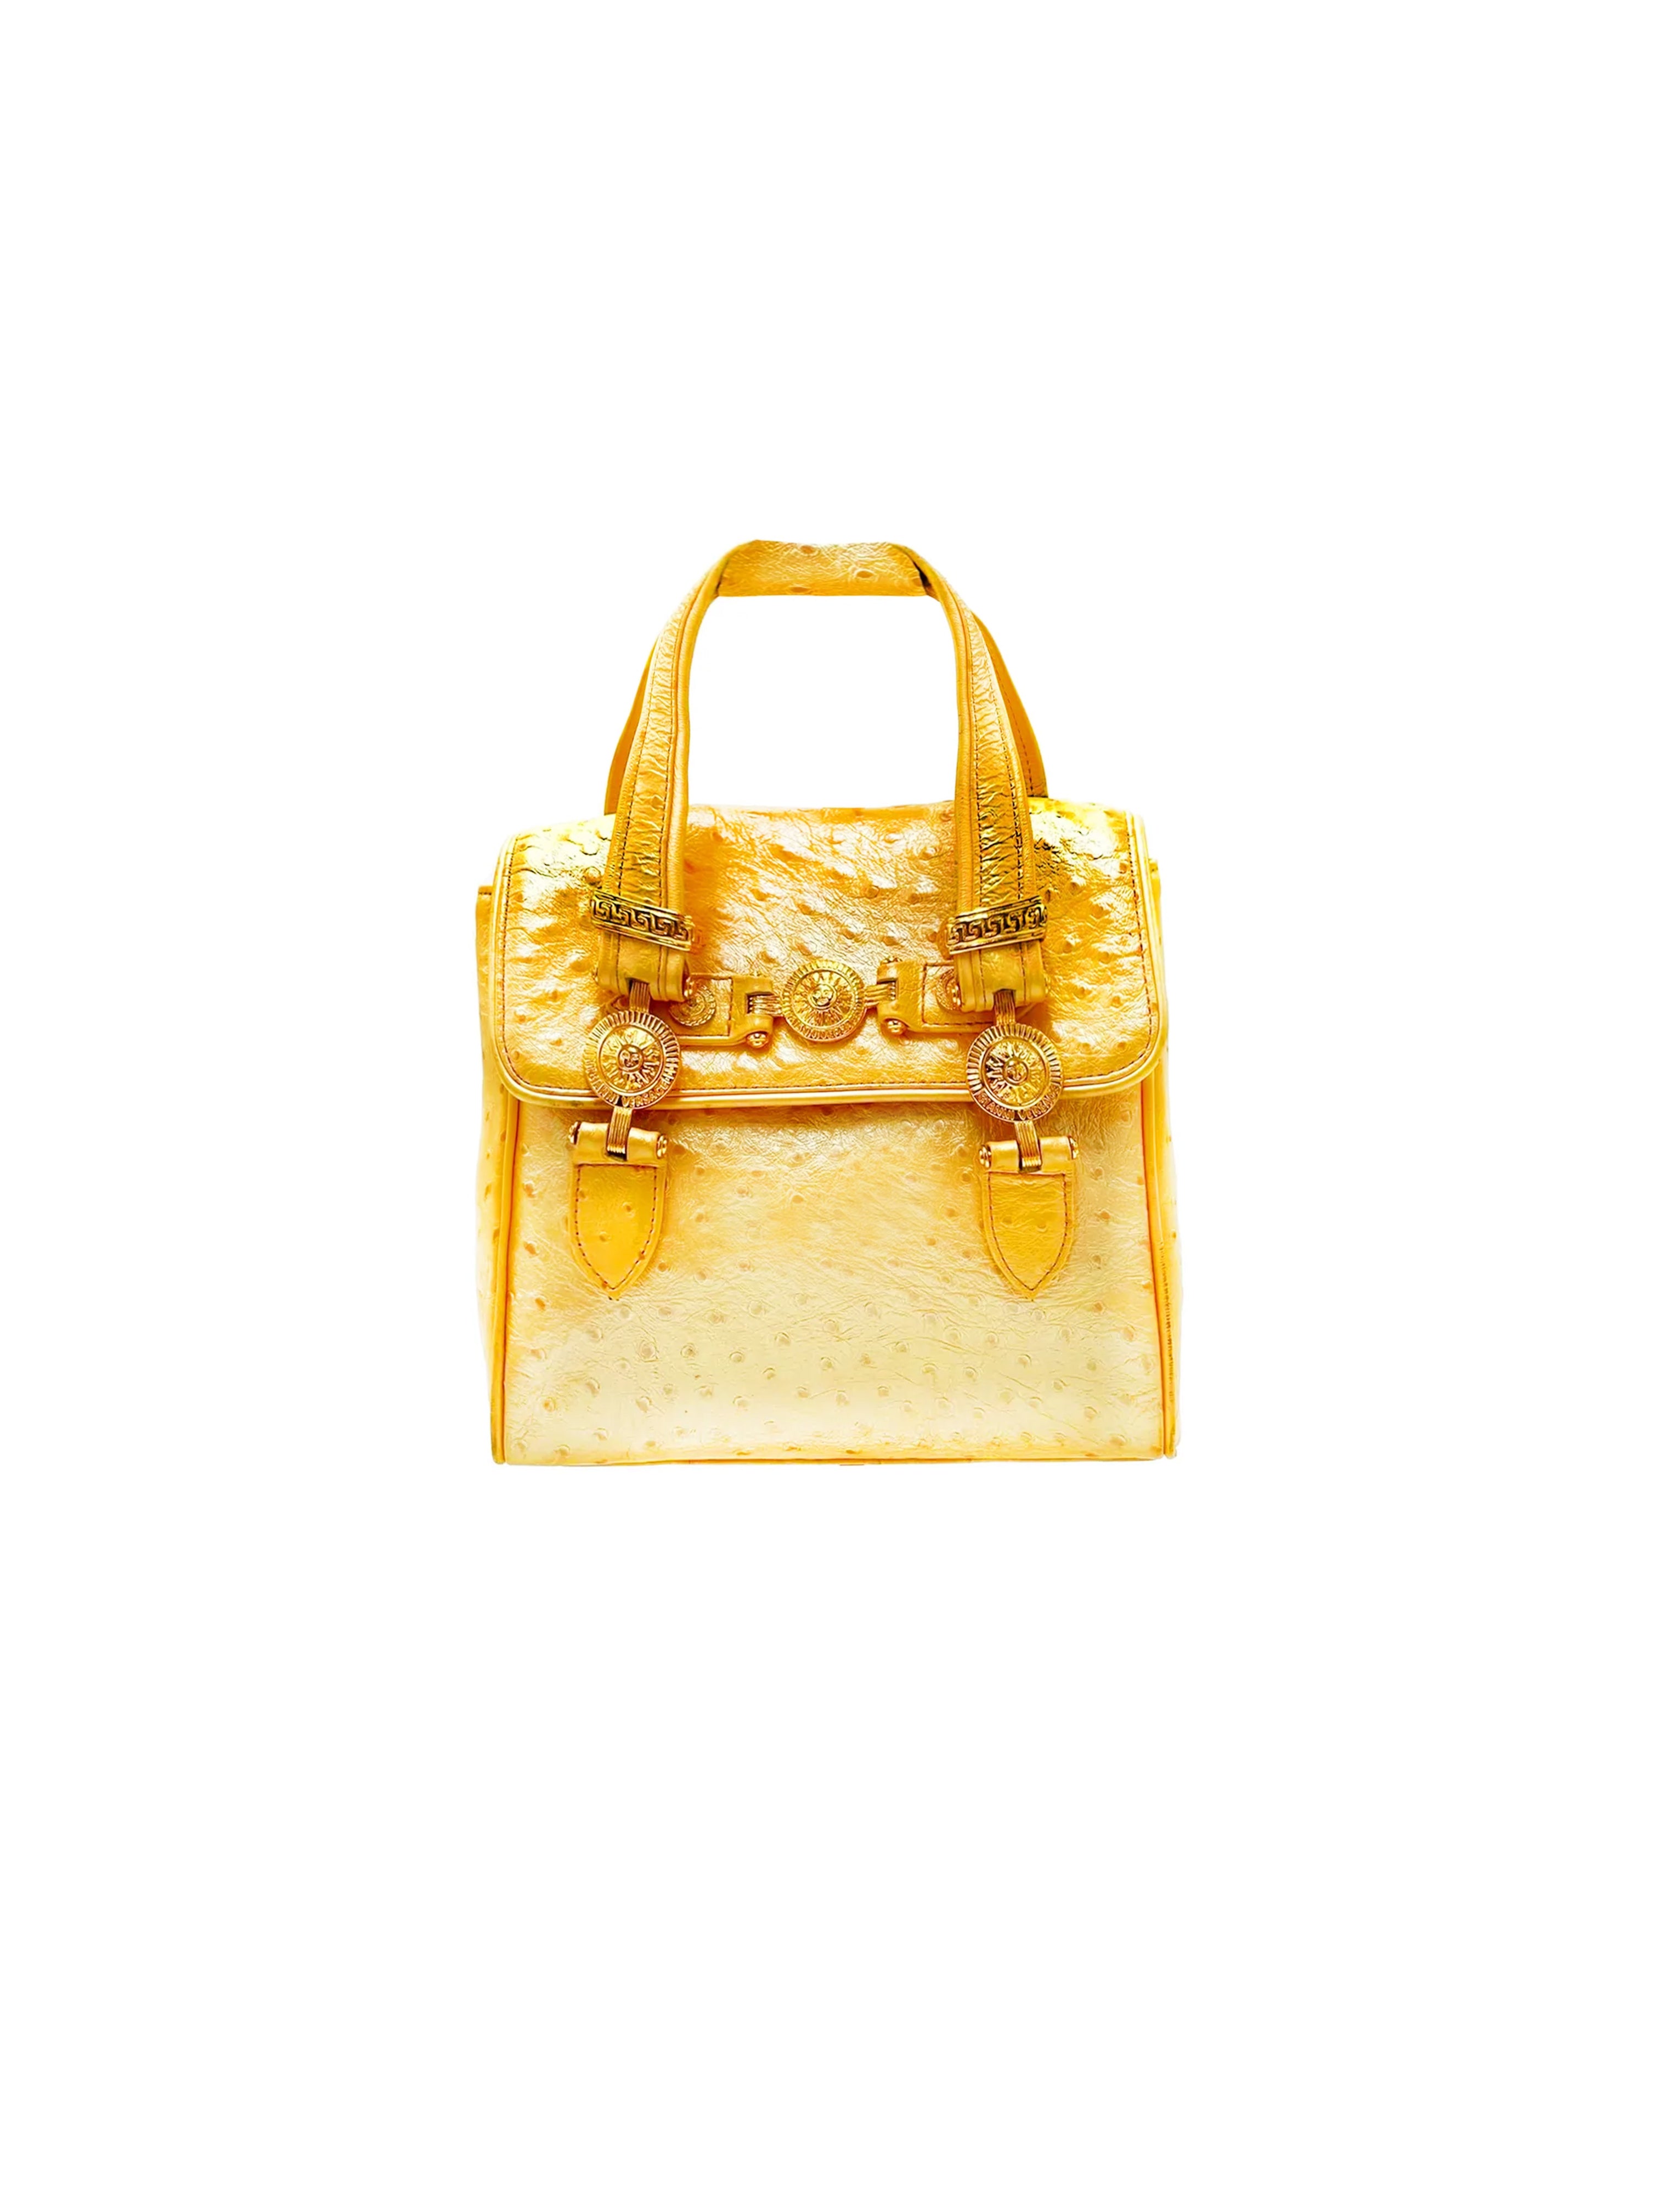 Versace 2000s Yellow Ostrich Leather Mini Bag